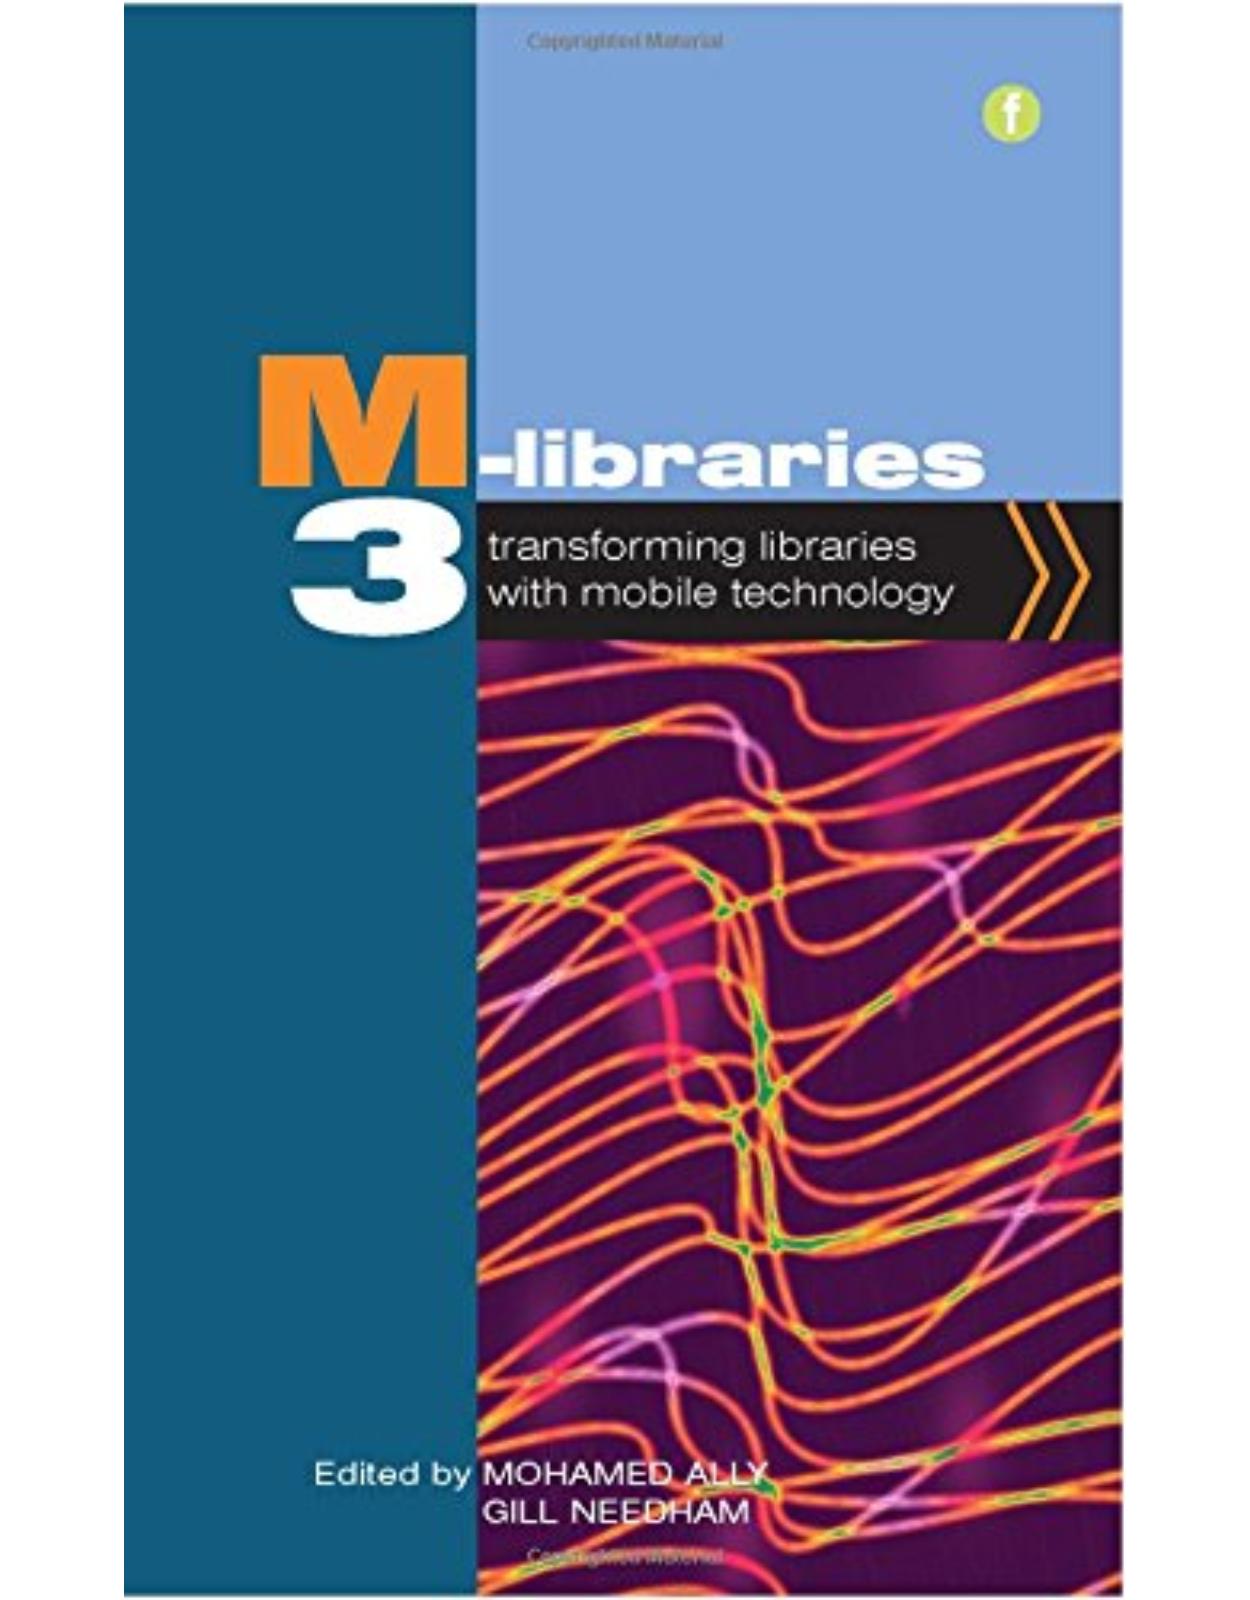 M-Libraries 3: Transforming Libraries with Mobile Technology